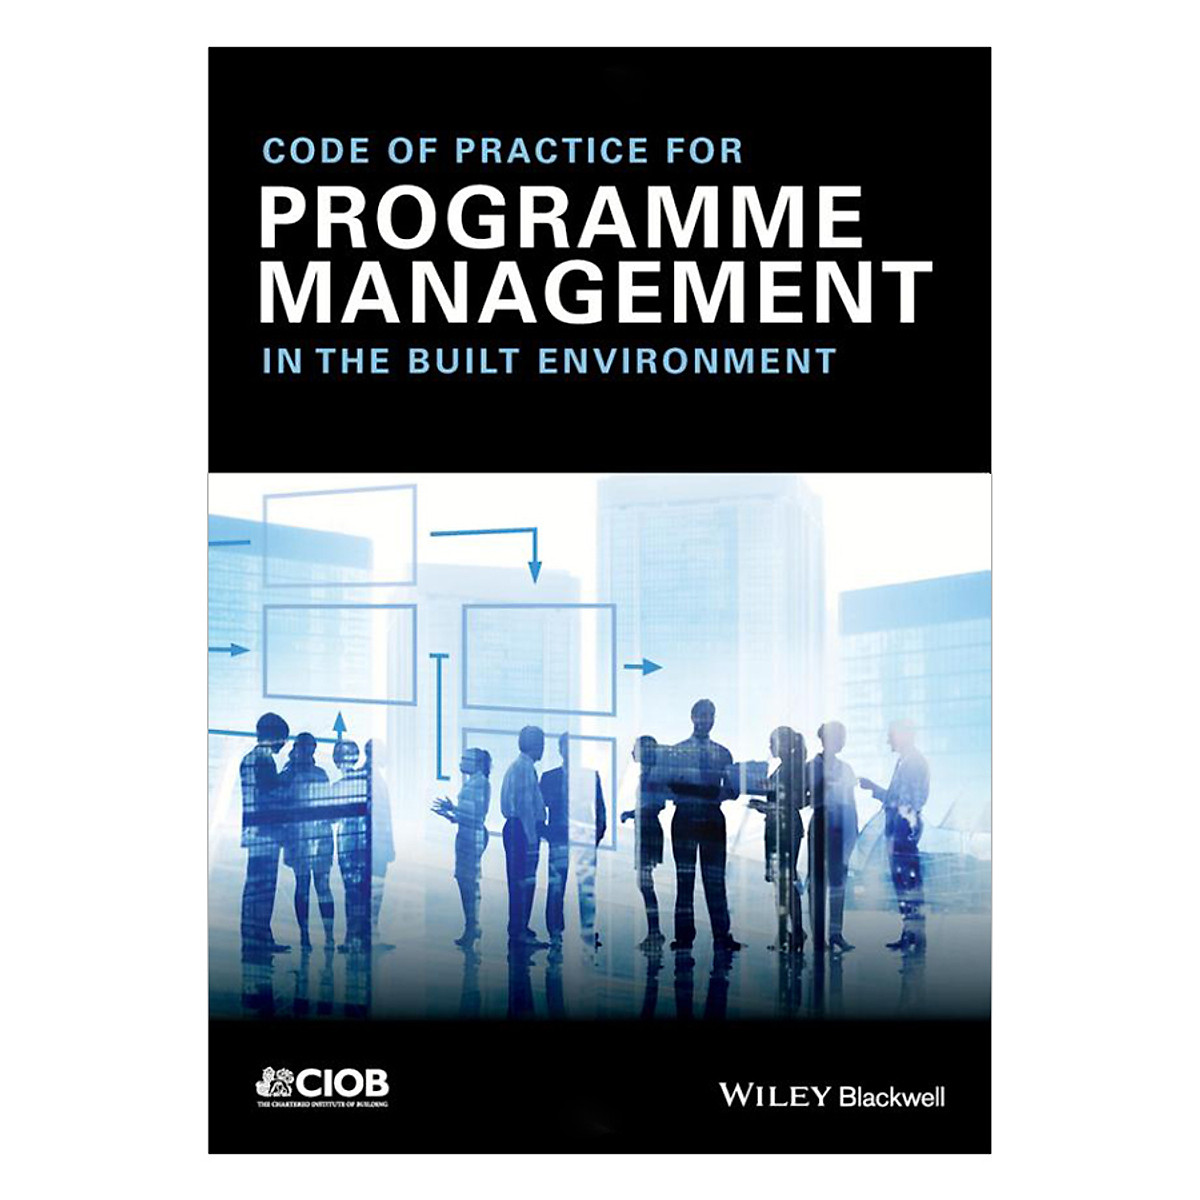 Code Of Practice For Programme Management - In The Built Environment